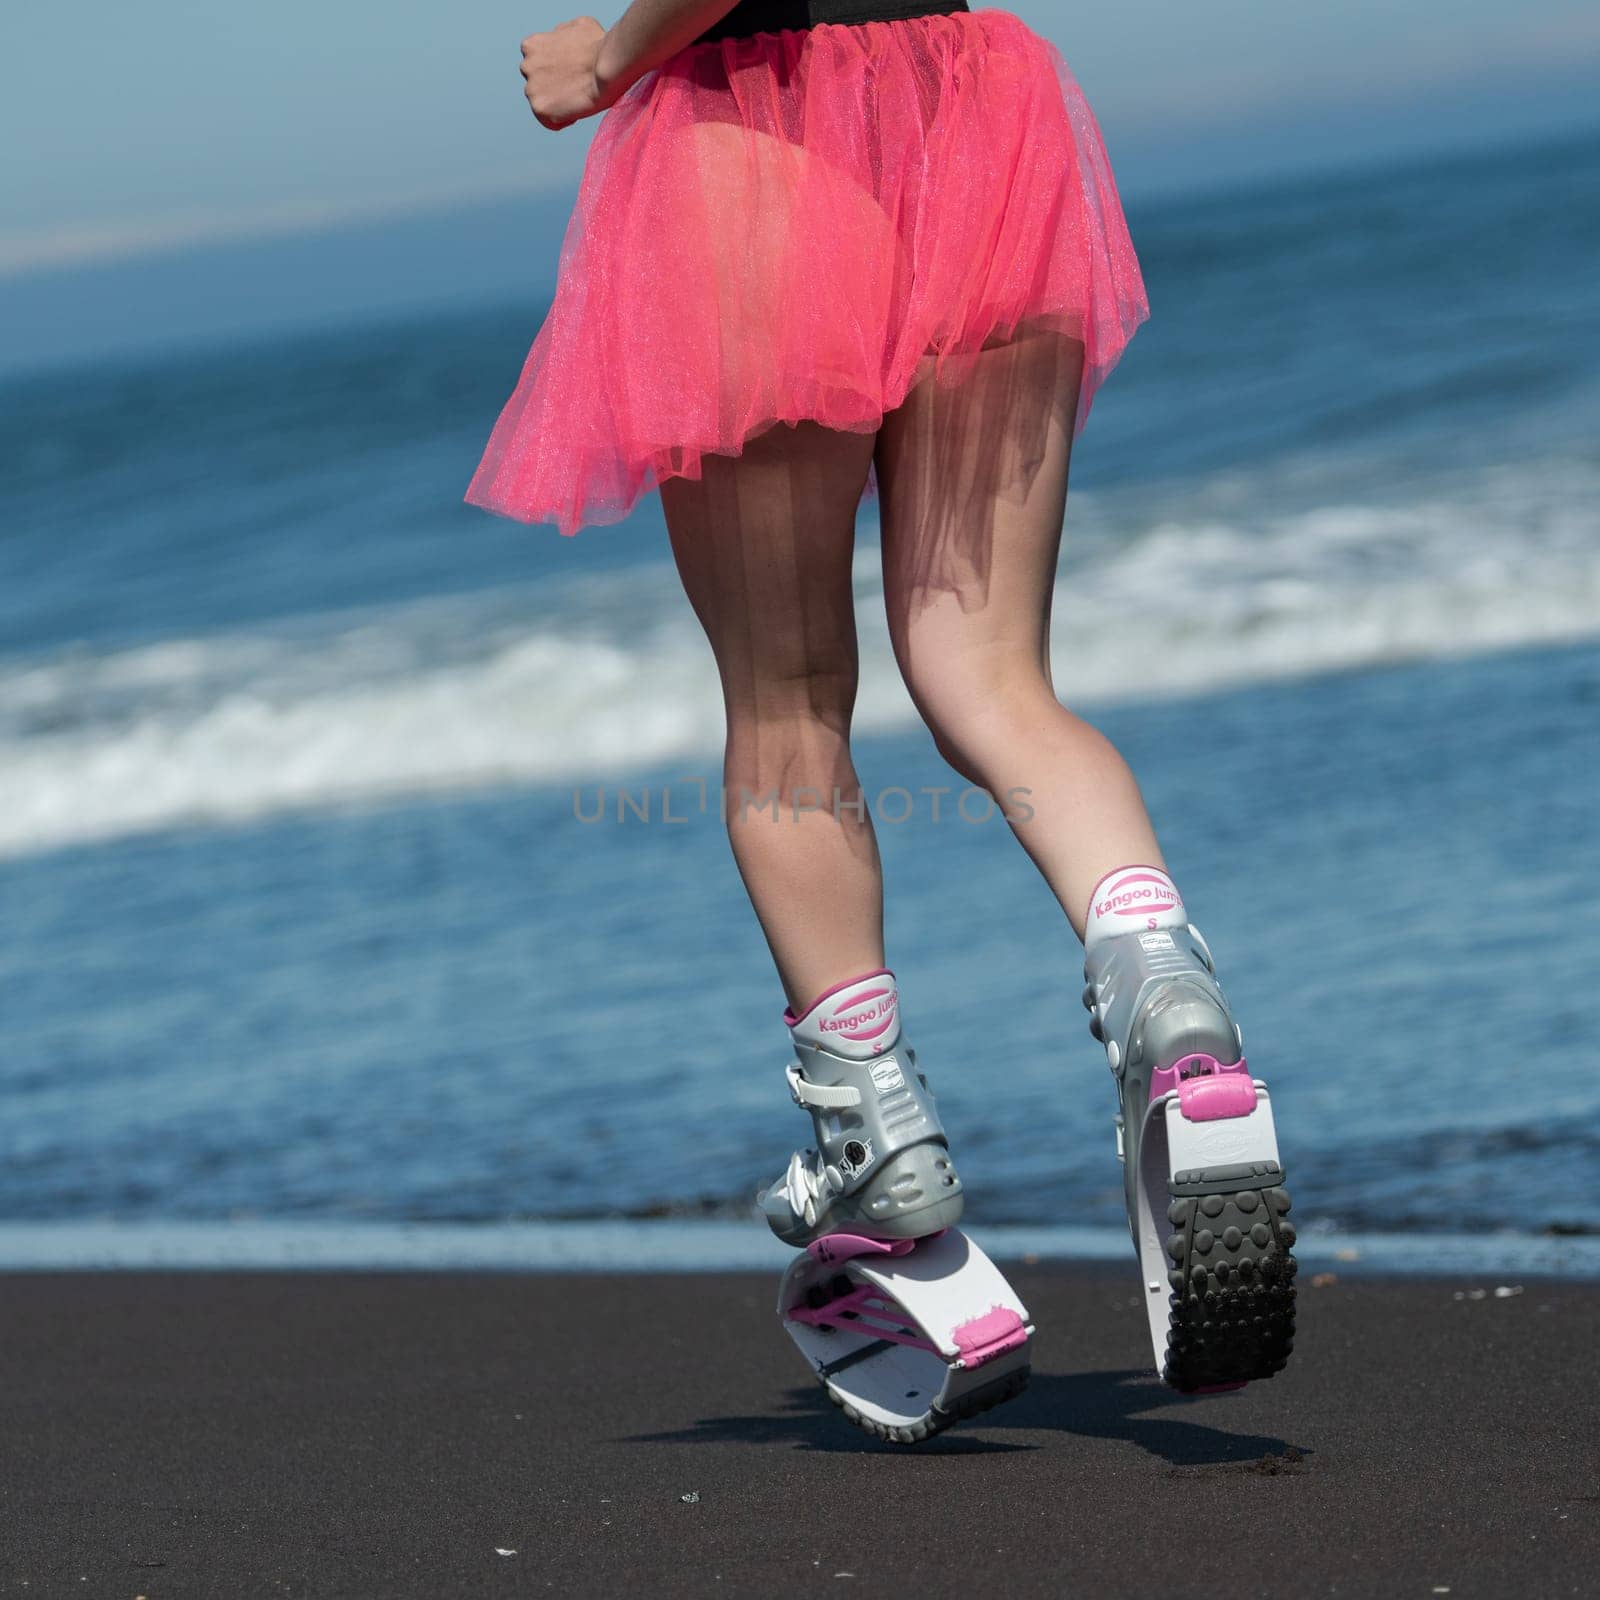 Rear view of female legs in Kangoo Jumps boots, swimsuit and short pink skirt running and jumping on beach during fitness training. Dutch angle shot by Alexander-Piragis